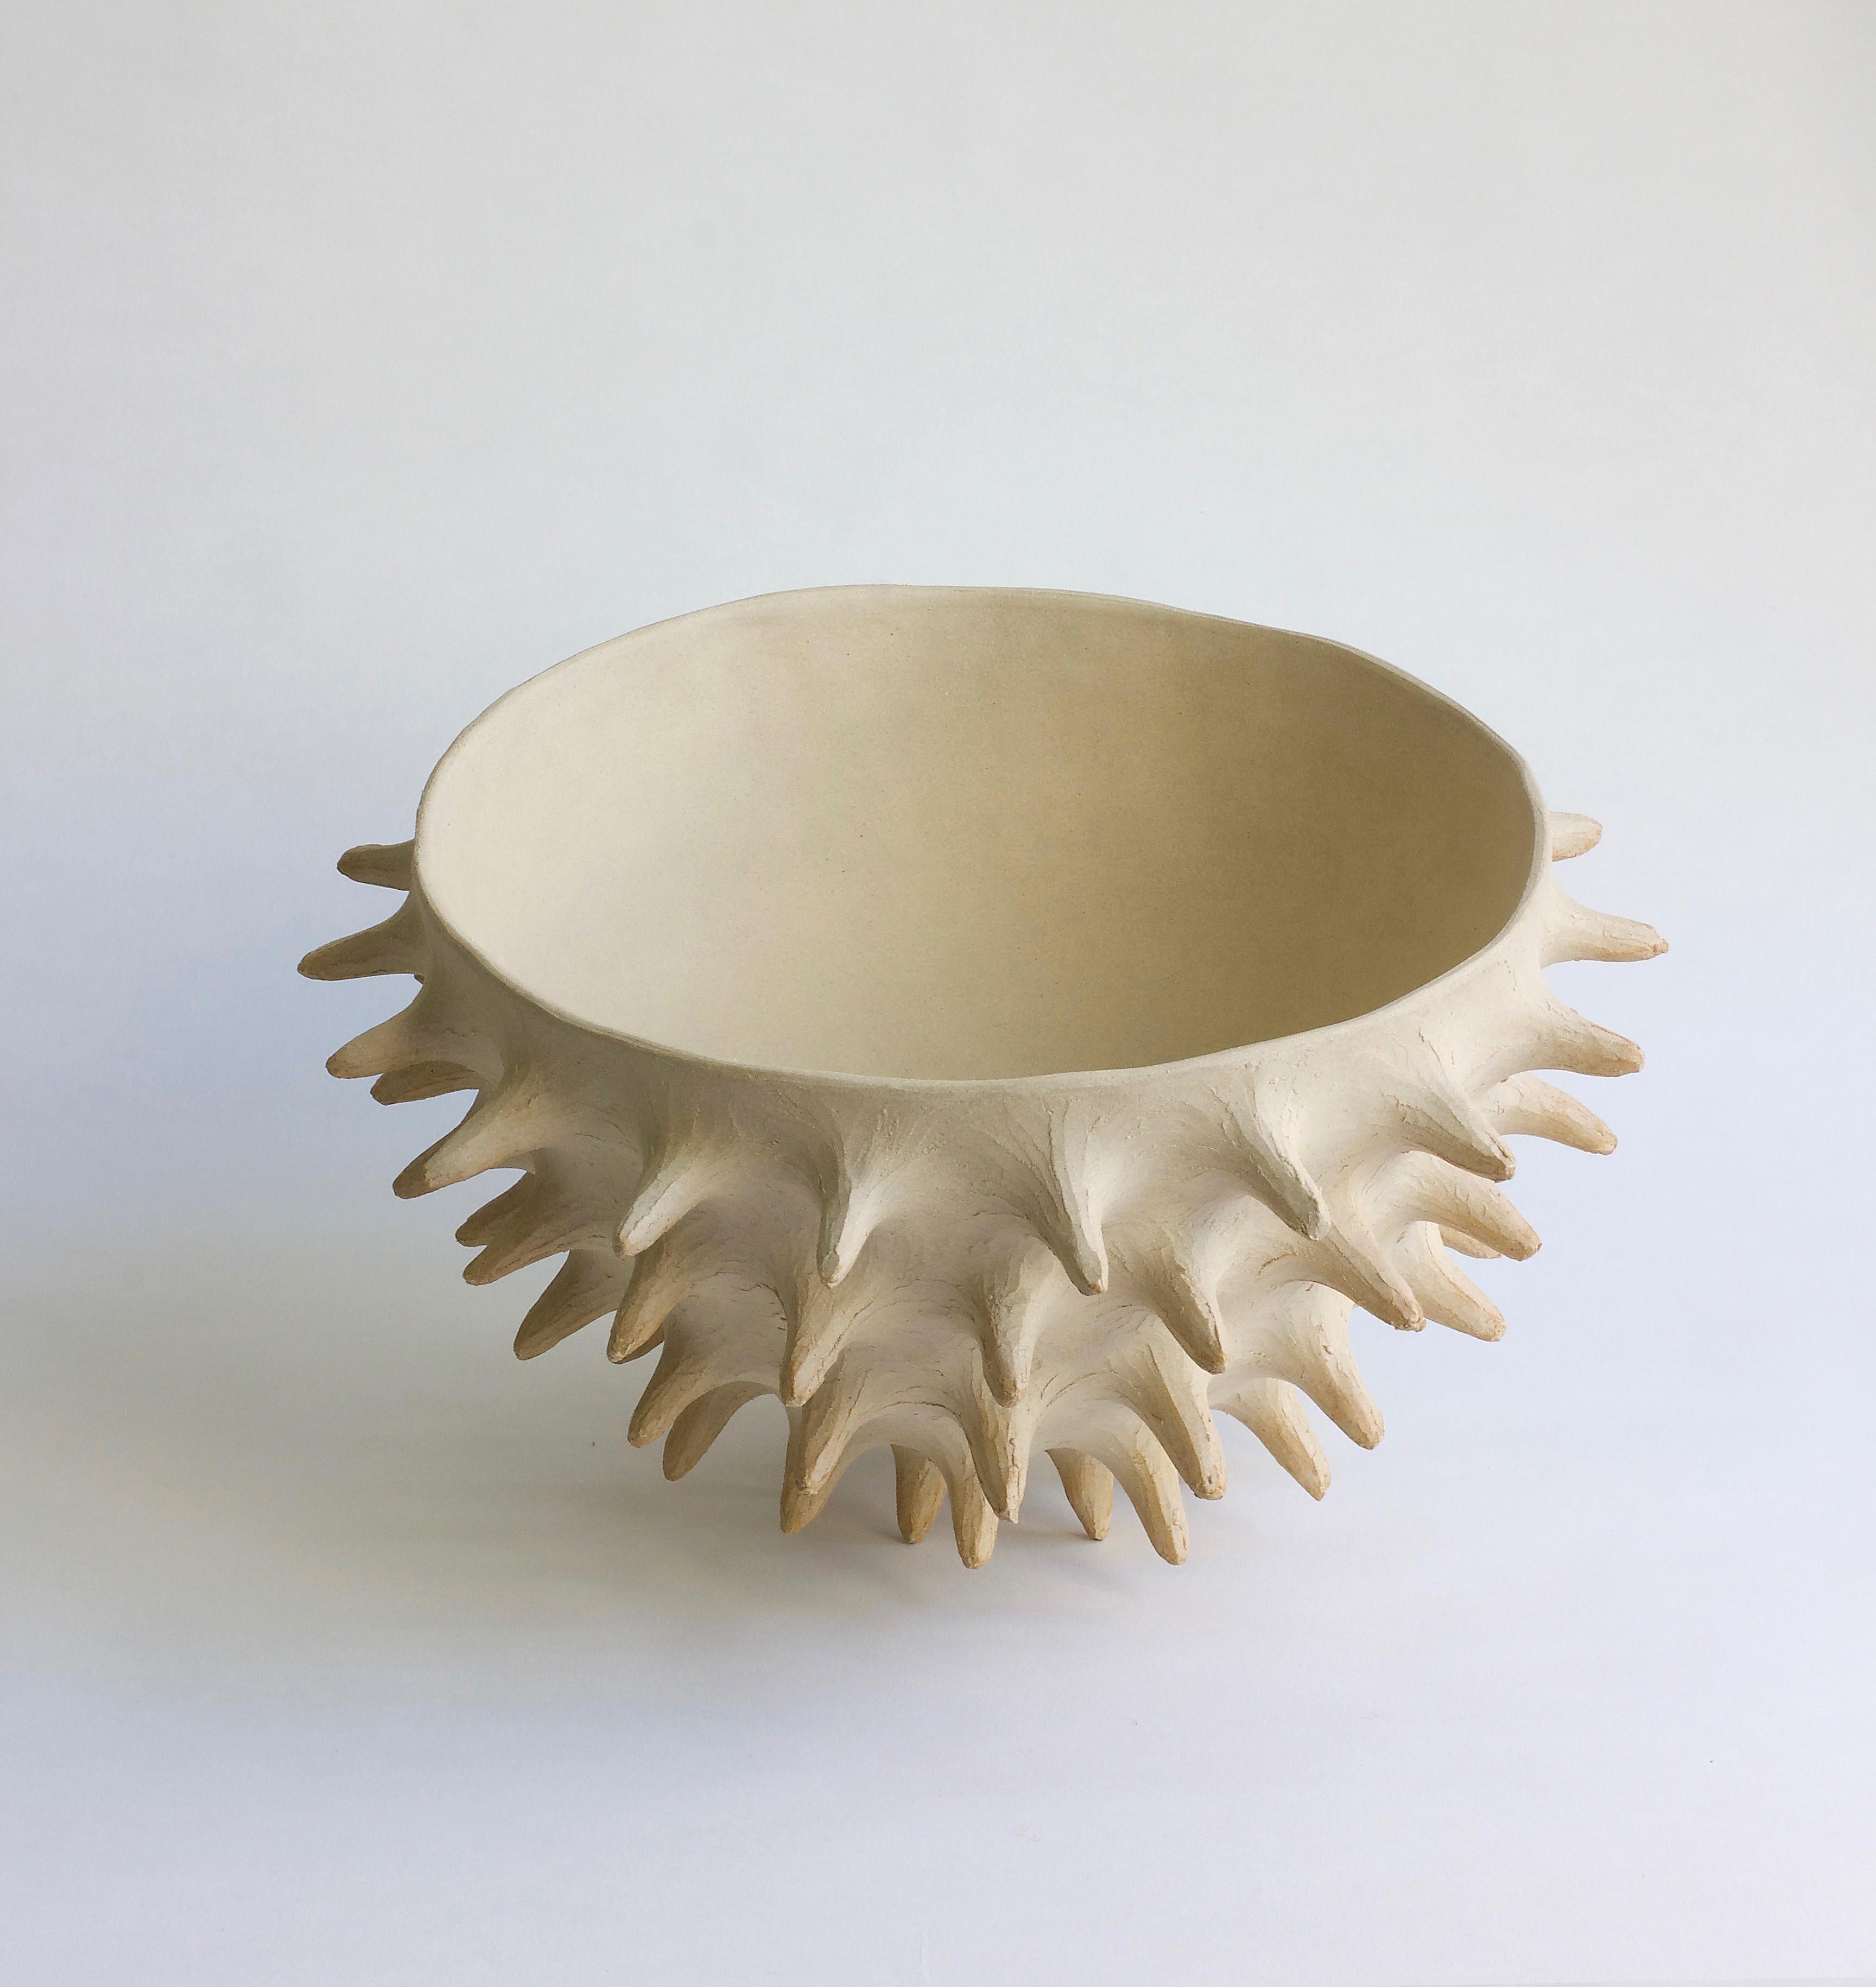 White brutalist ceramic bowl with urchin-like spikes. This sculpture is rich in light and shadow, with rusty tips, and a smooth inner surface. The artist patiently shapes the raw clay into bold, organic forms, where the mark of the sculptor is